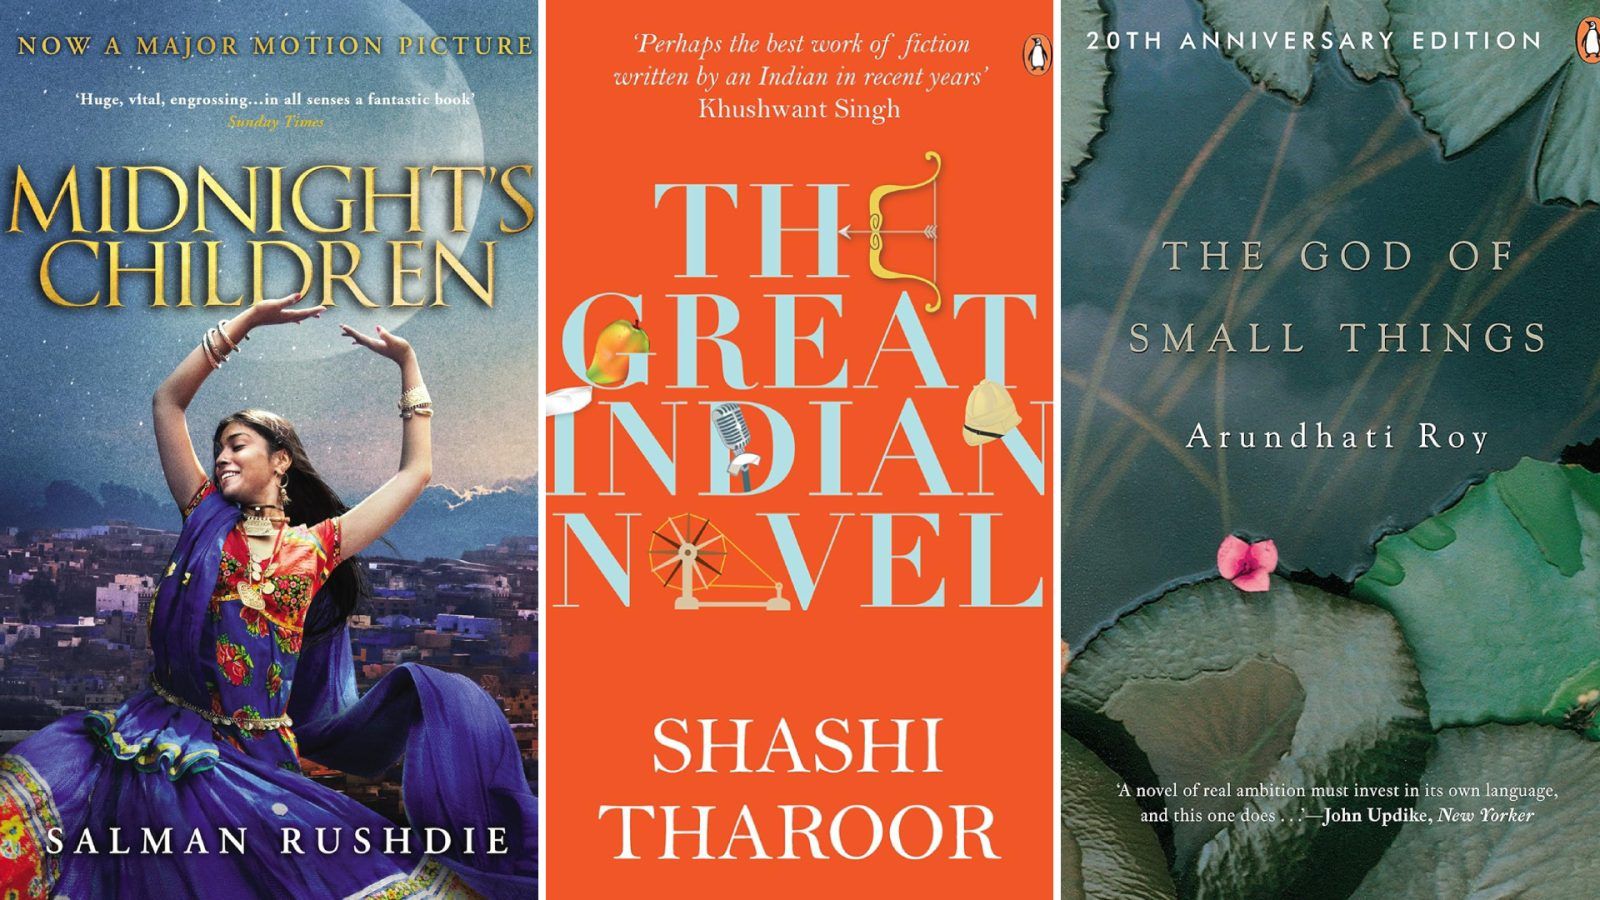 Bestselling Books By Indian Authors